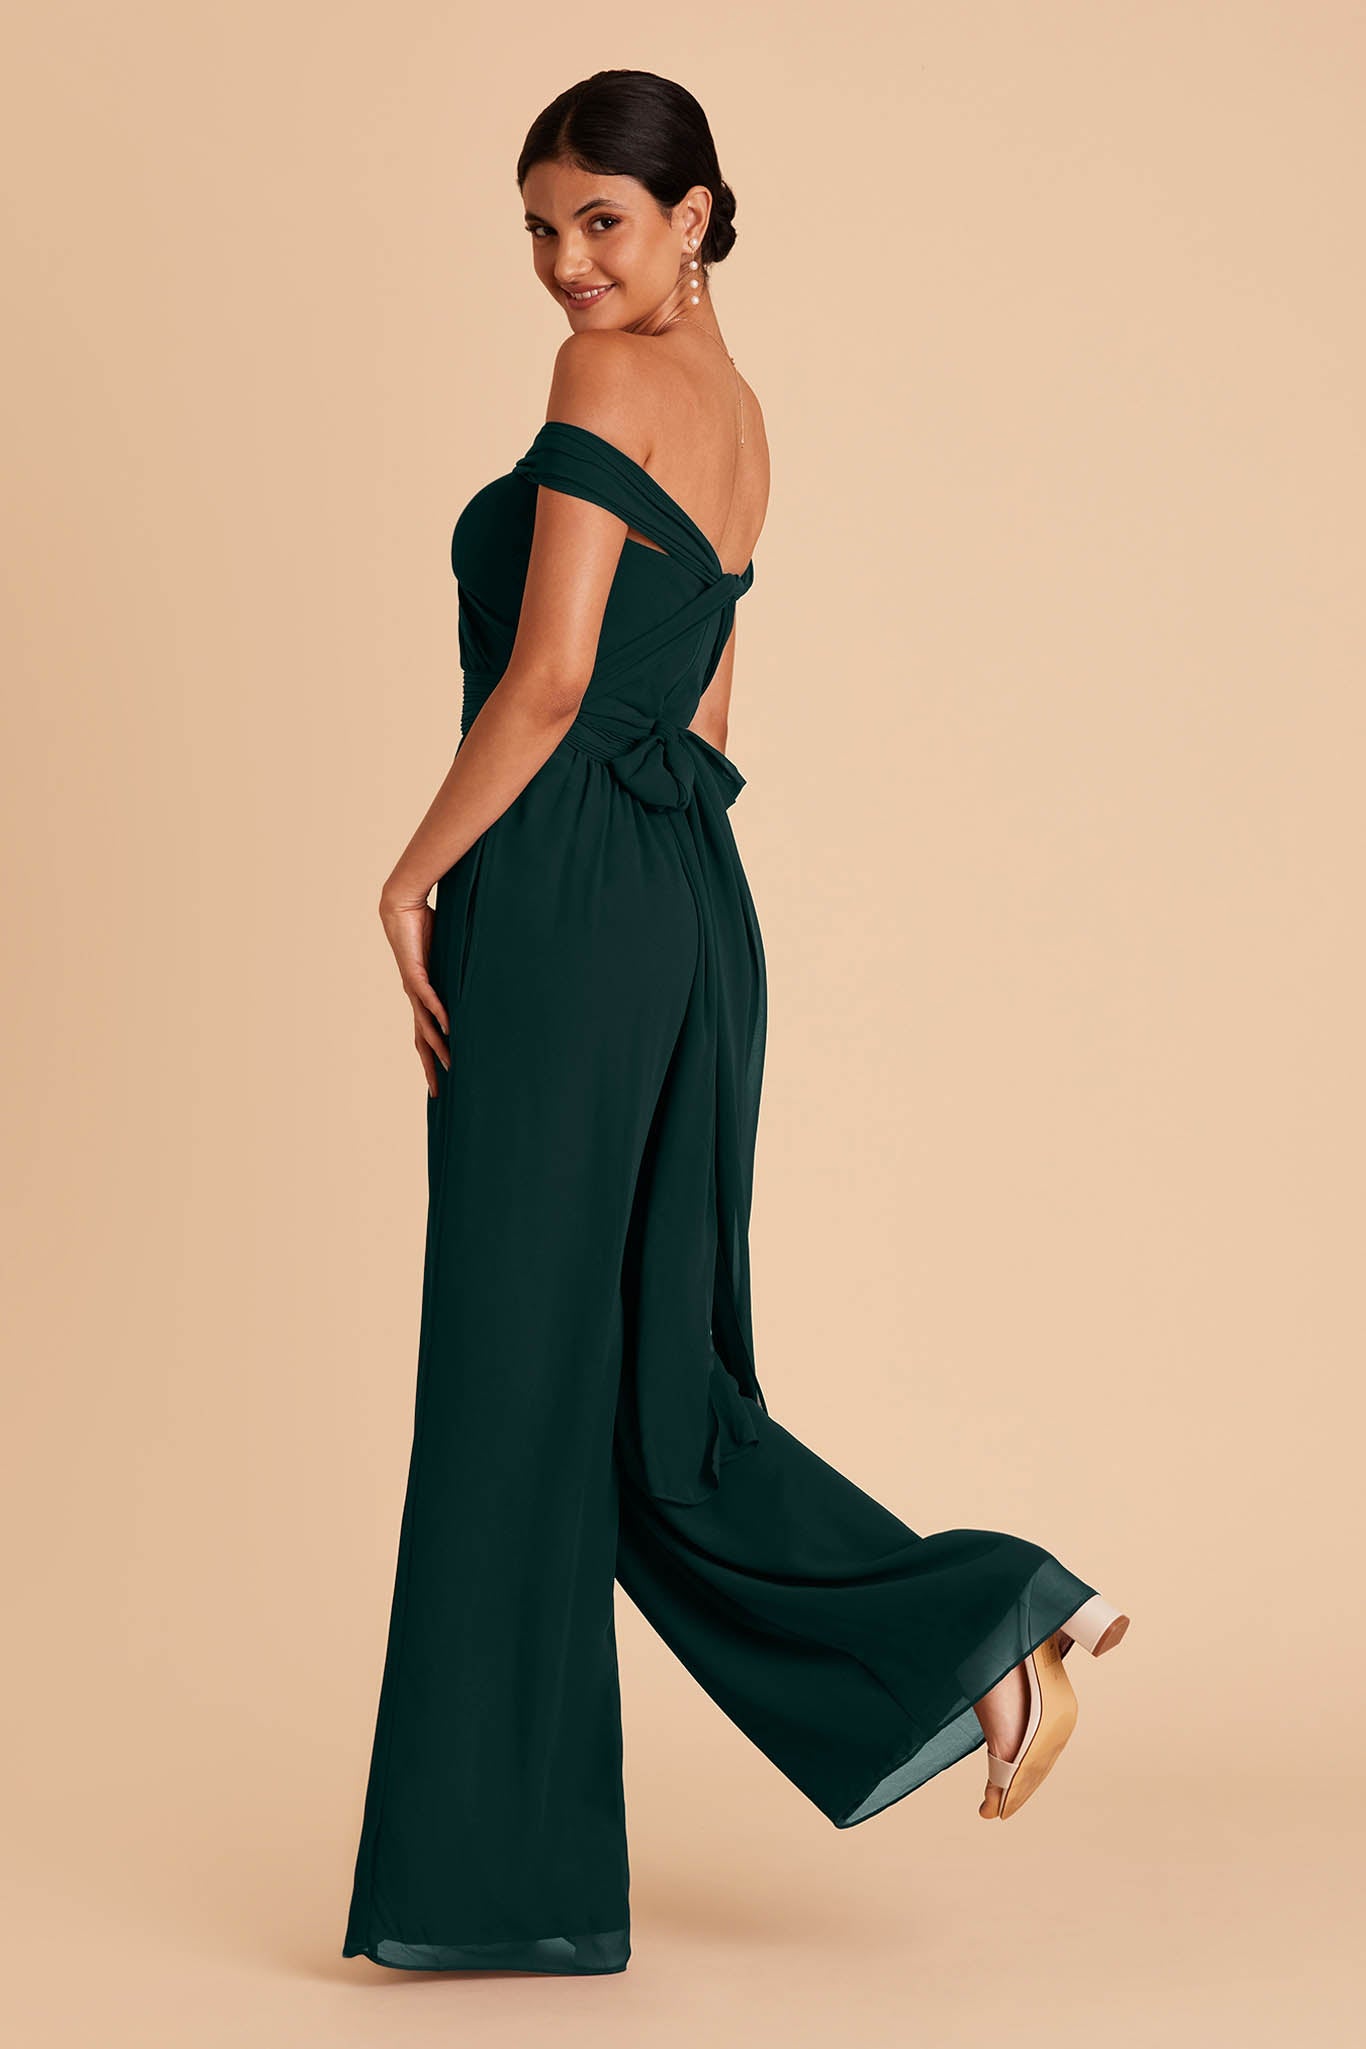 Dark green wedding jumpsuit with sweetheart bodice with convertible neckline and tie in the back